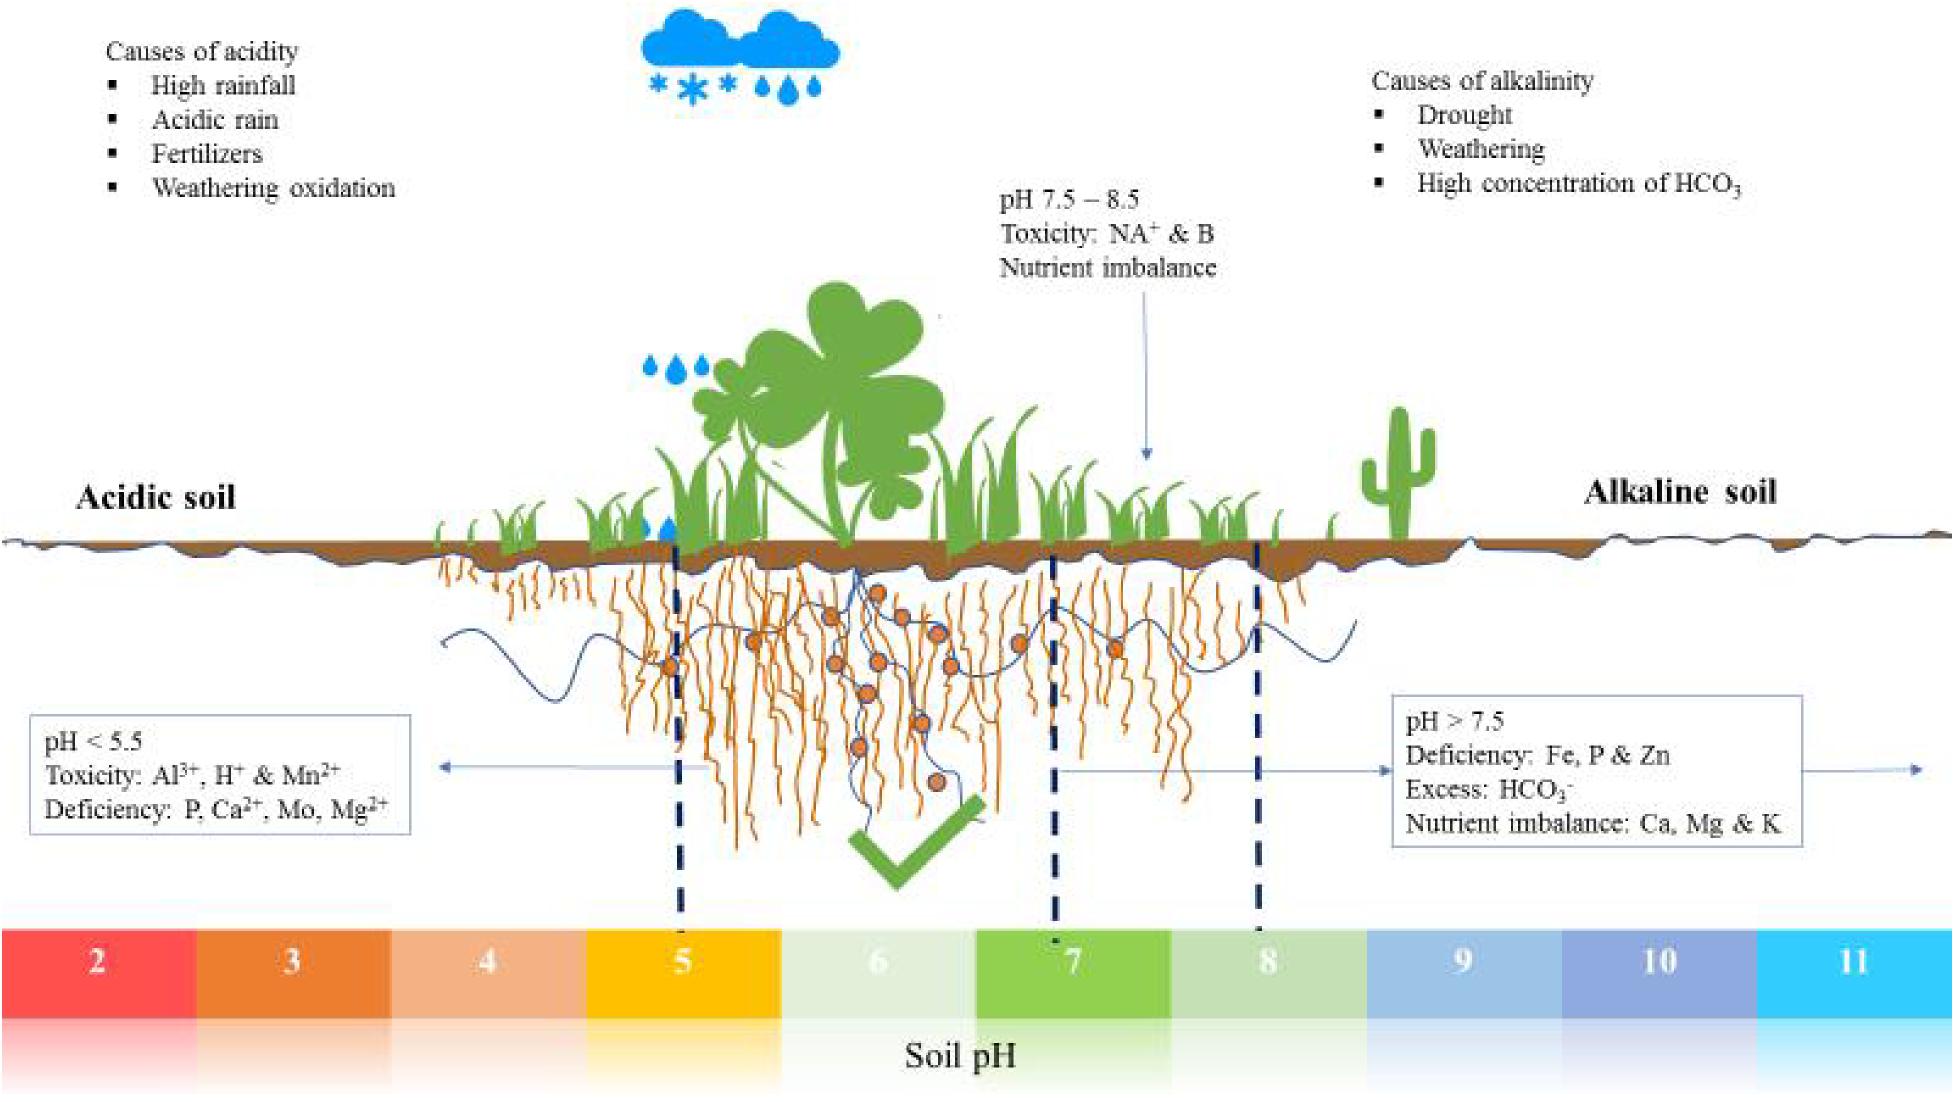 IV. The Impact of Alkaline Soil on Plant Health and Growth